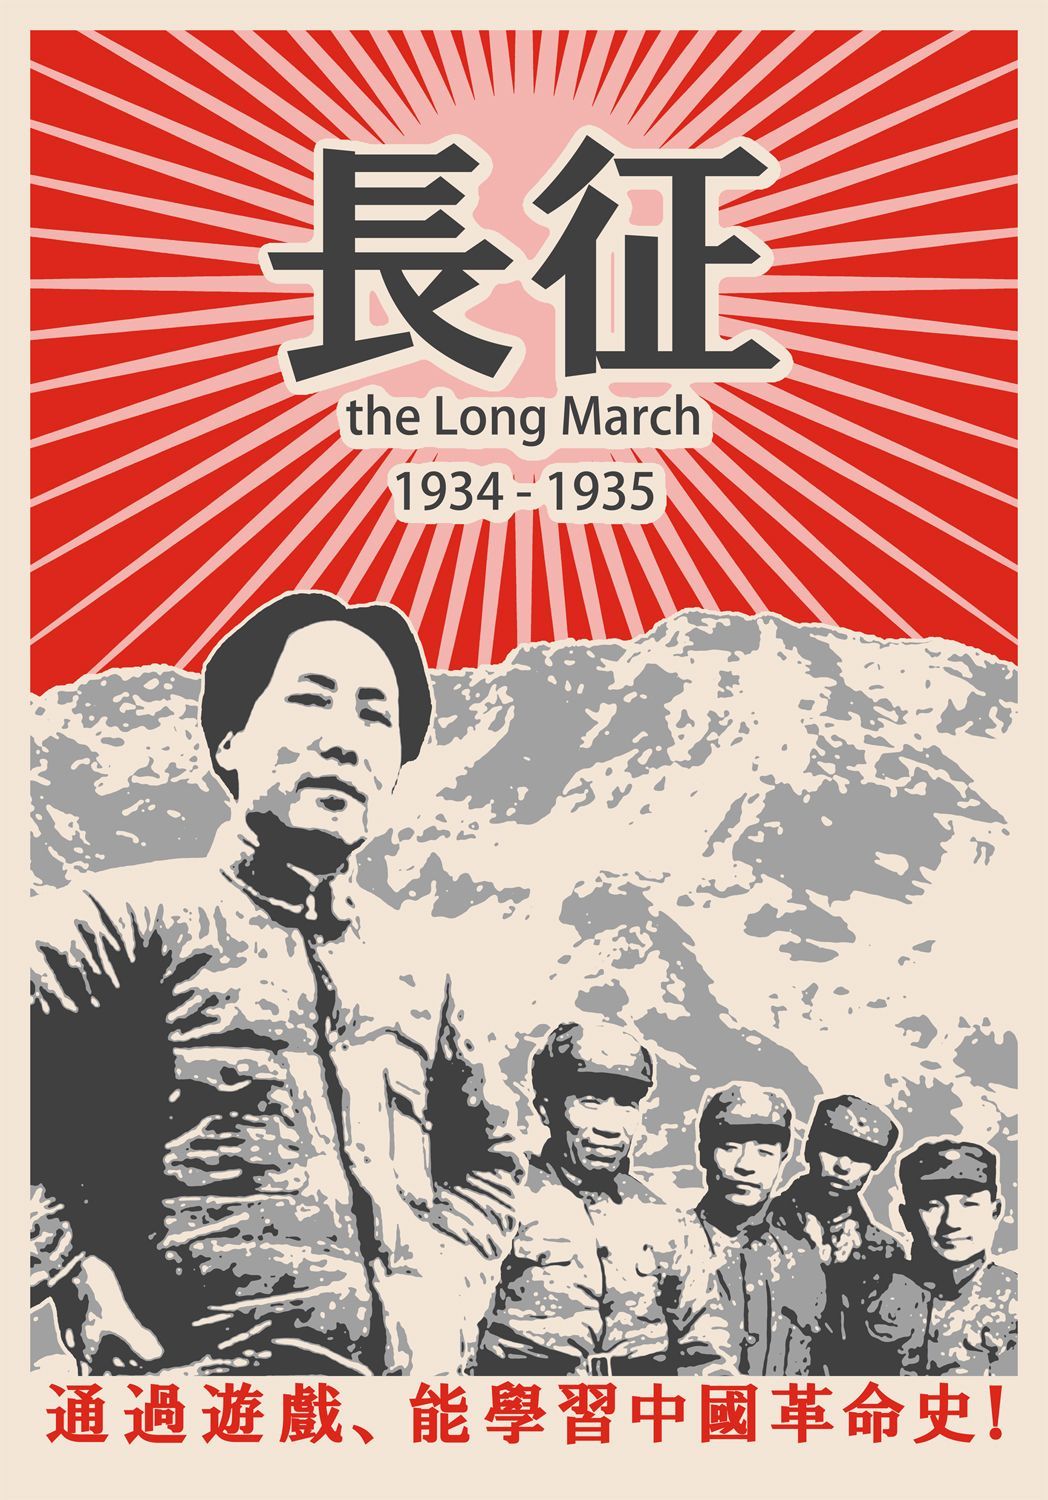 The Long March 1934-1935